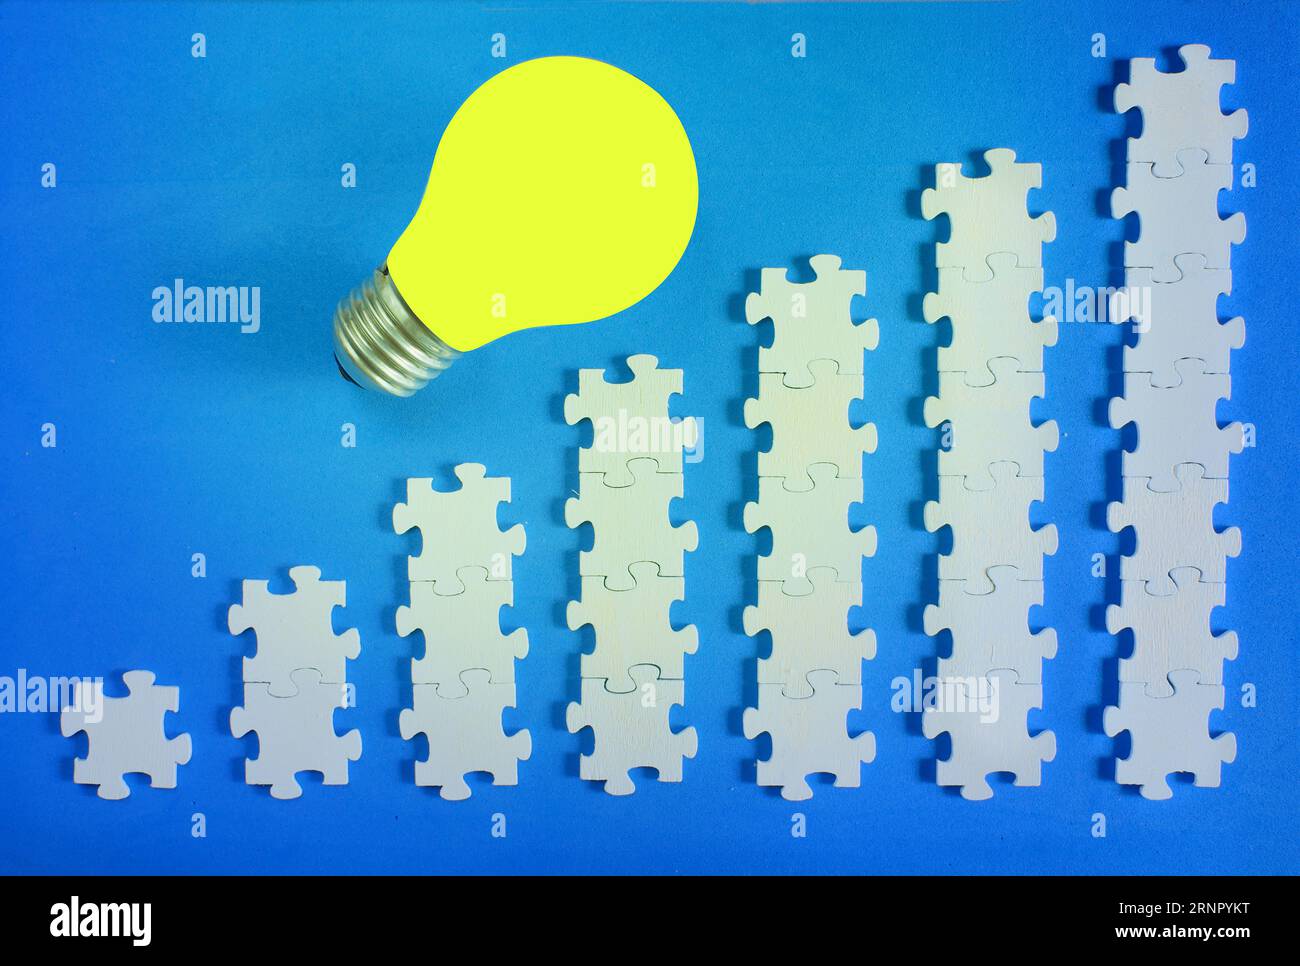 Business concept,making money,ideas,innovation, human resources,recruitment,team building and success with jigsaw puzzle pieces and glowing light bulb Stock Photo